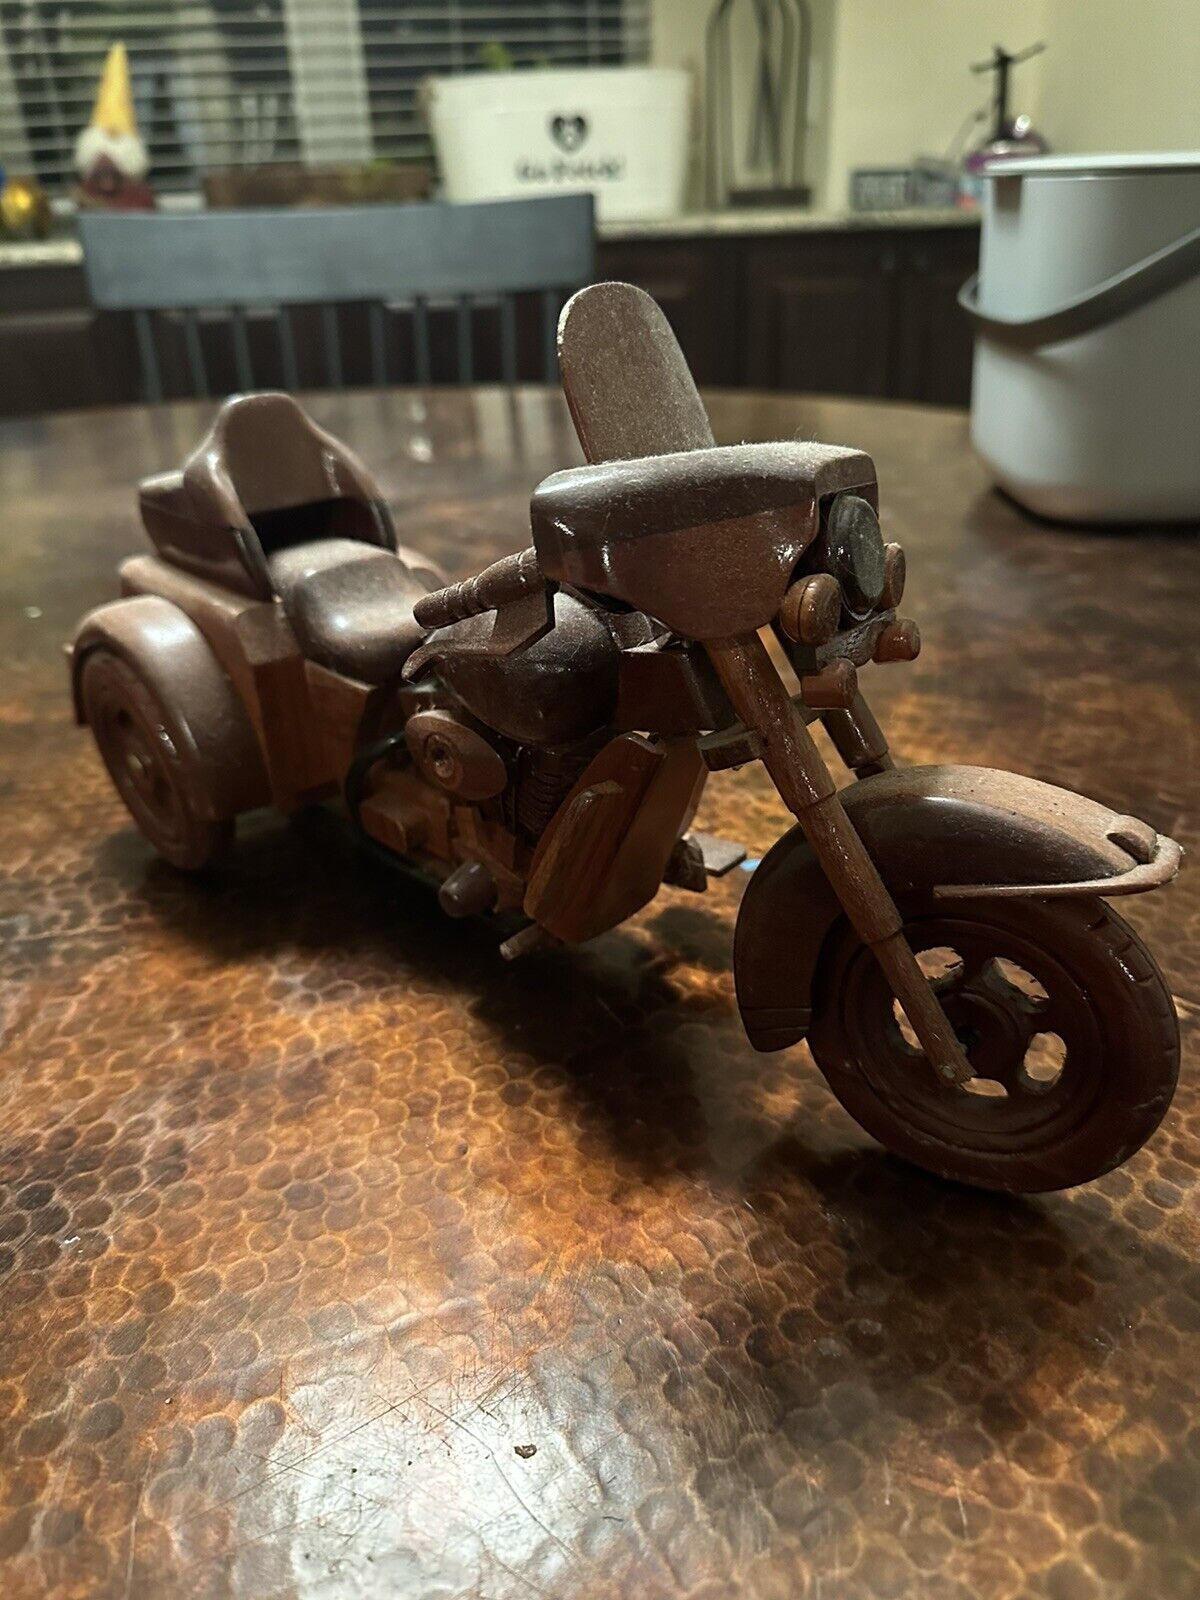 Vintage handcrafted wooden motorcycle